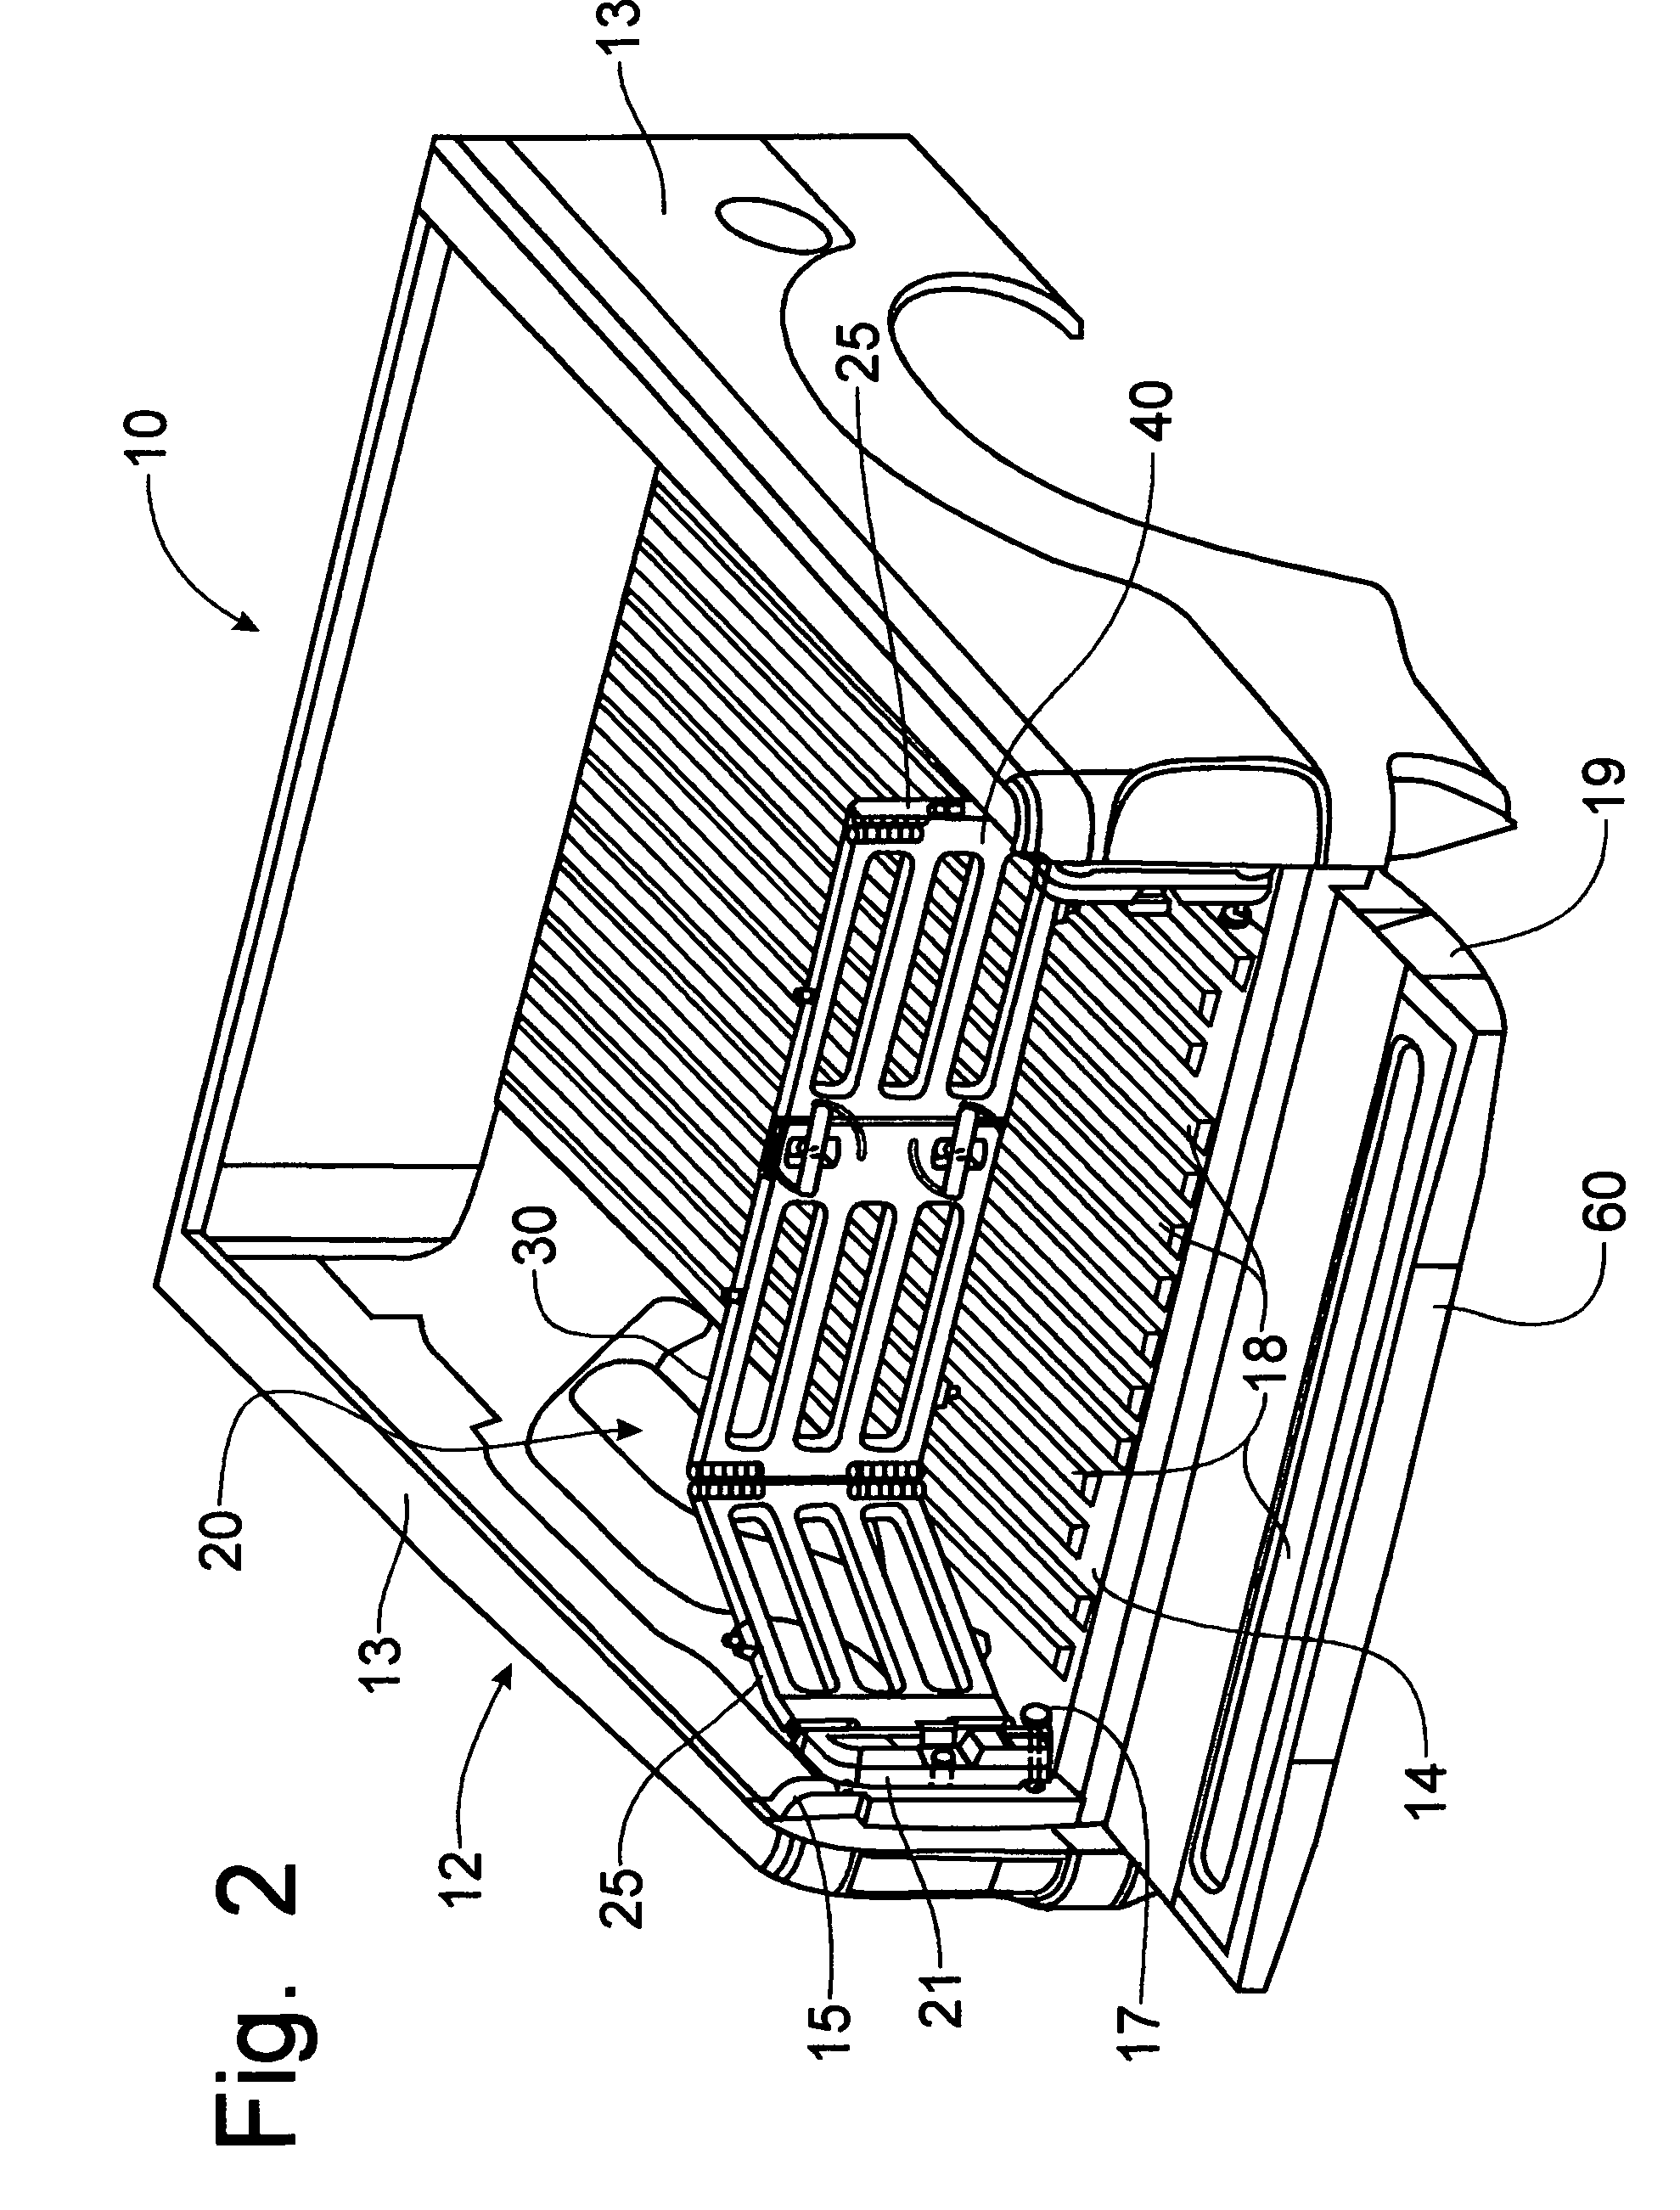 Pivoting cage cargo retainer for pick-up trucks